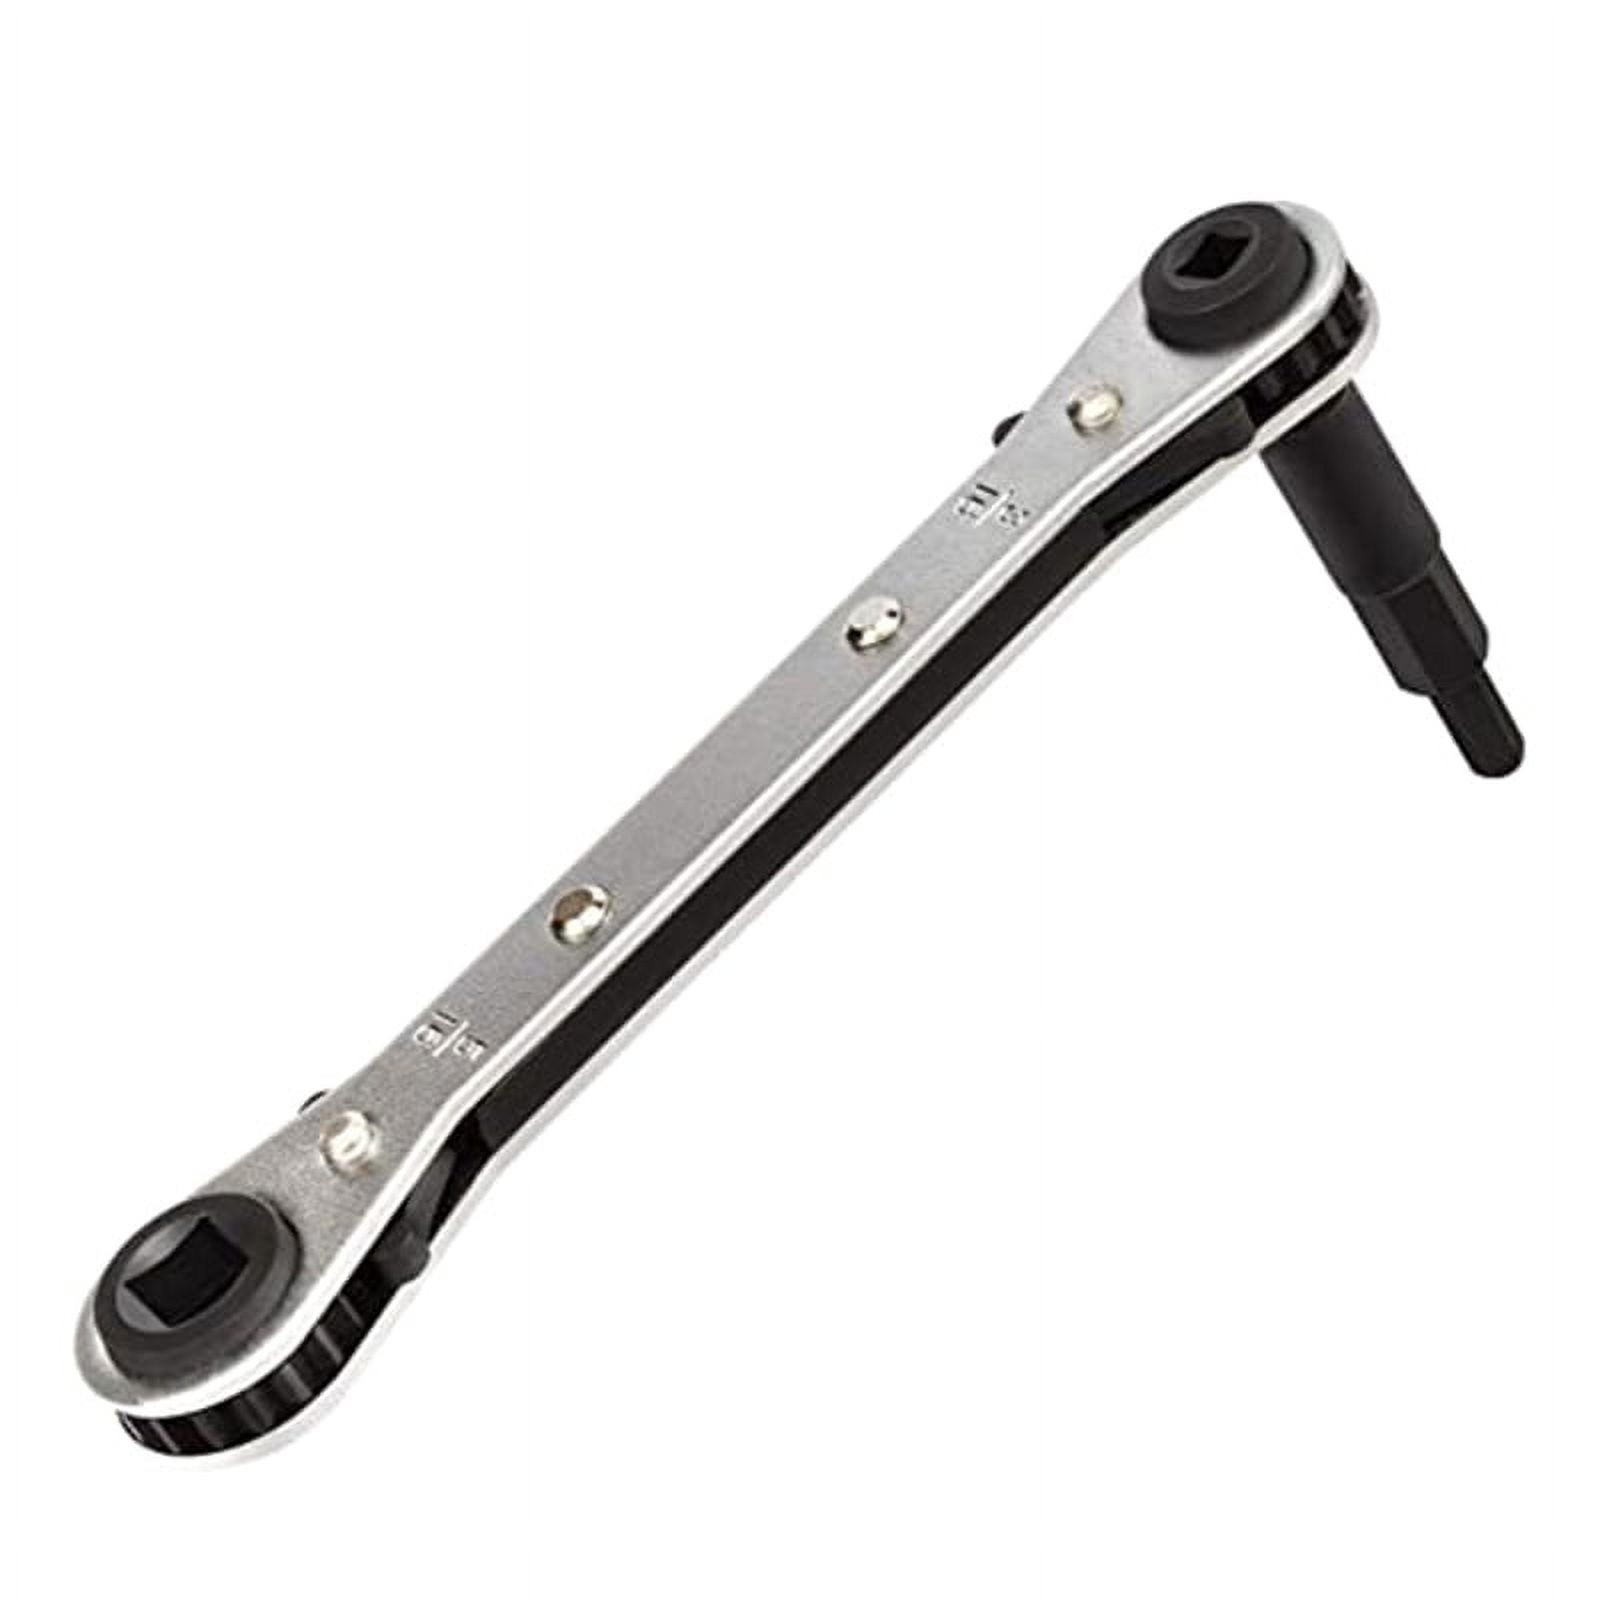 SMA Fixed Torque Wrench in Click Type 5/16 inch Bit that is Pre-set to